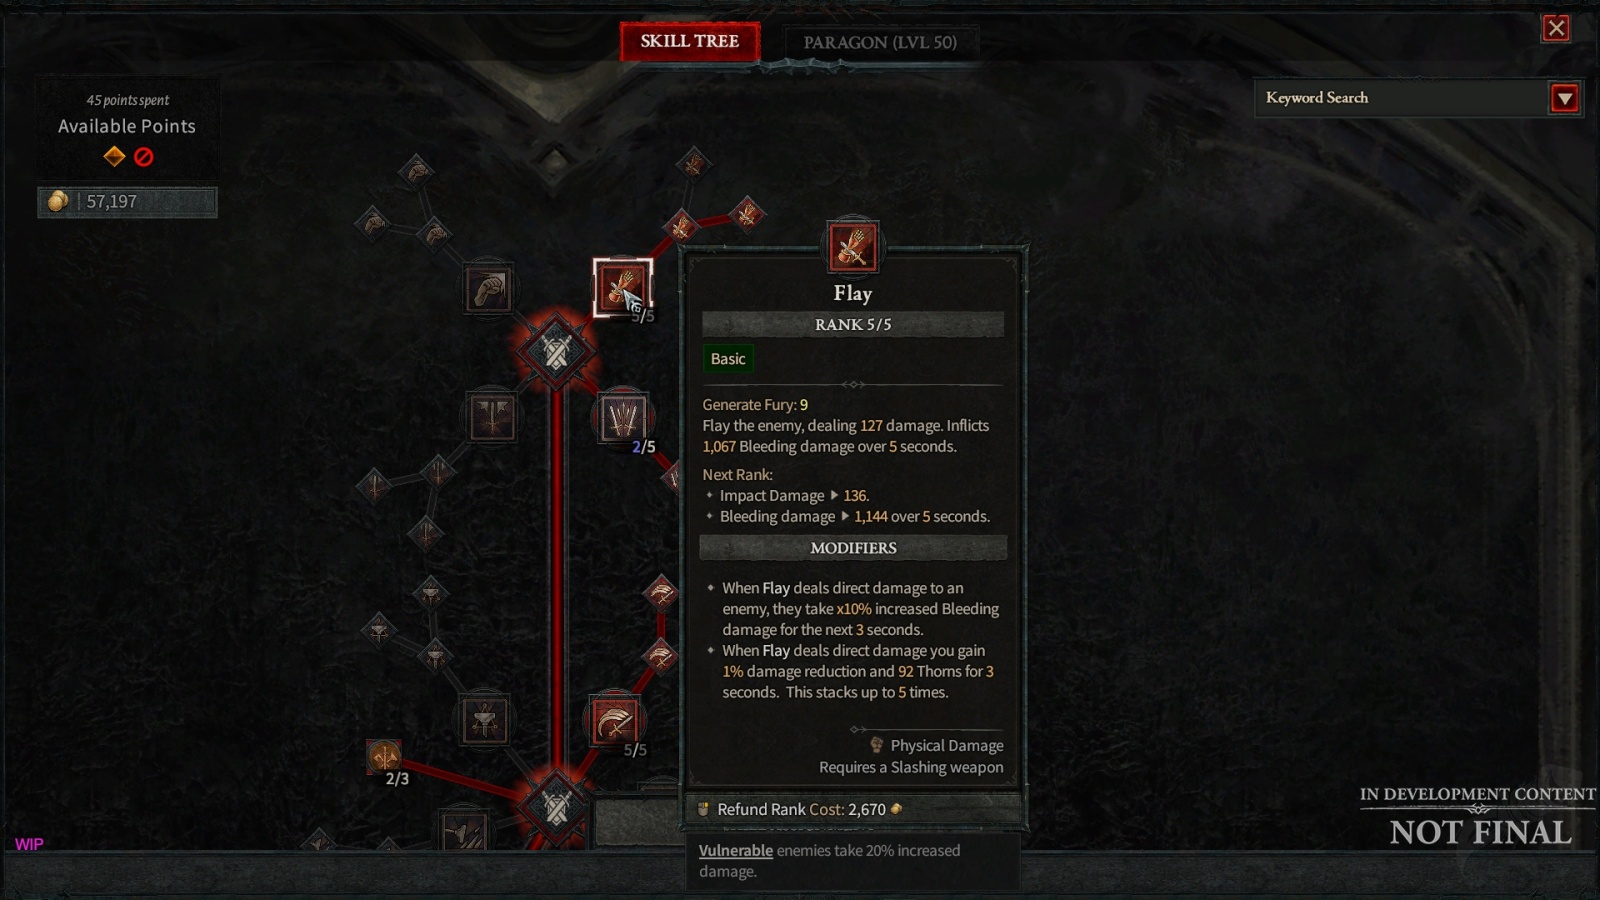 How to reach max level and Item Power in Diablo 4 - Polygon